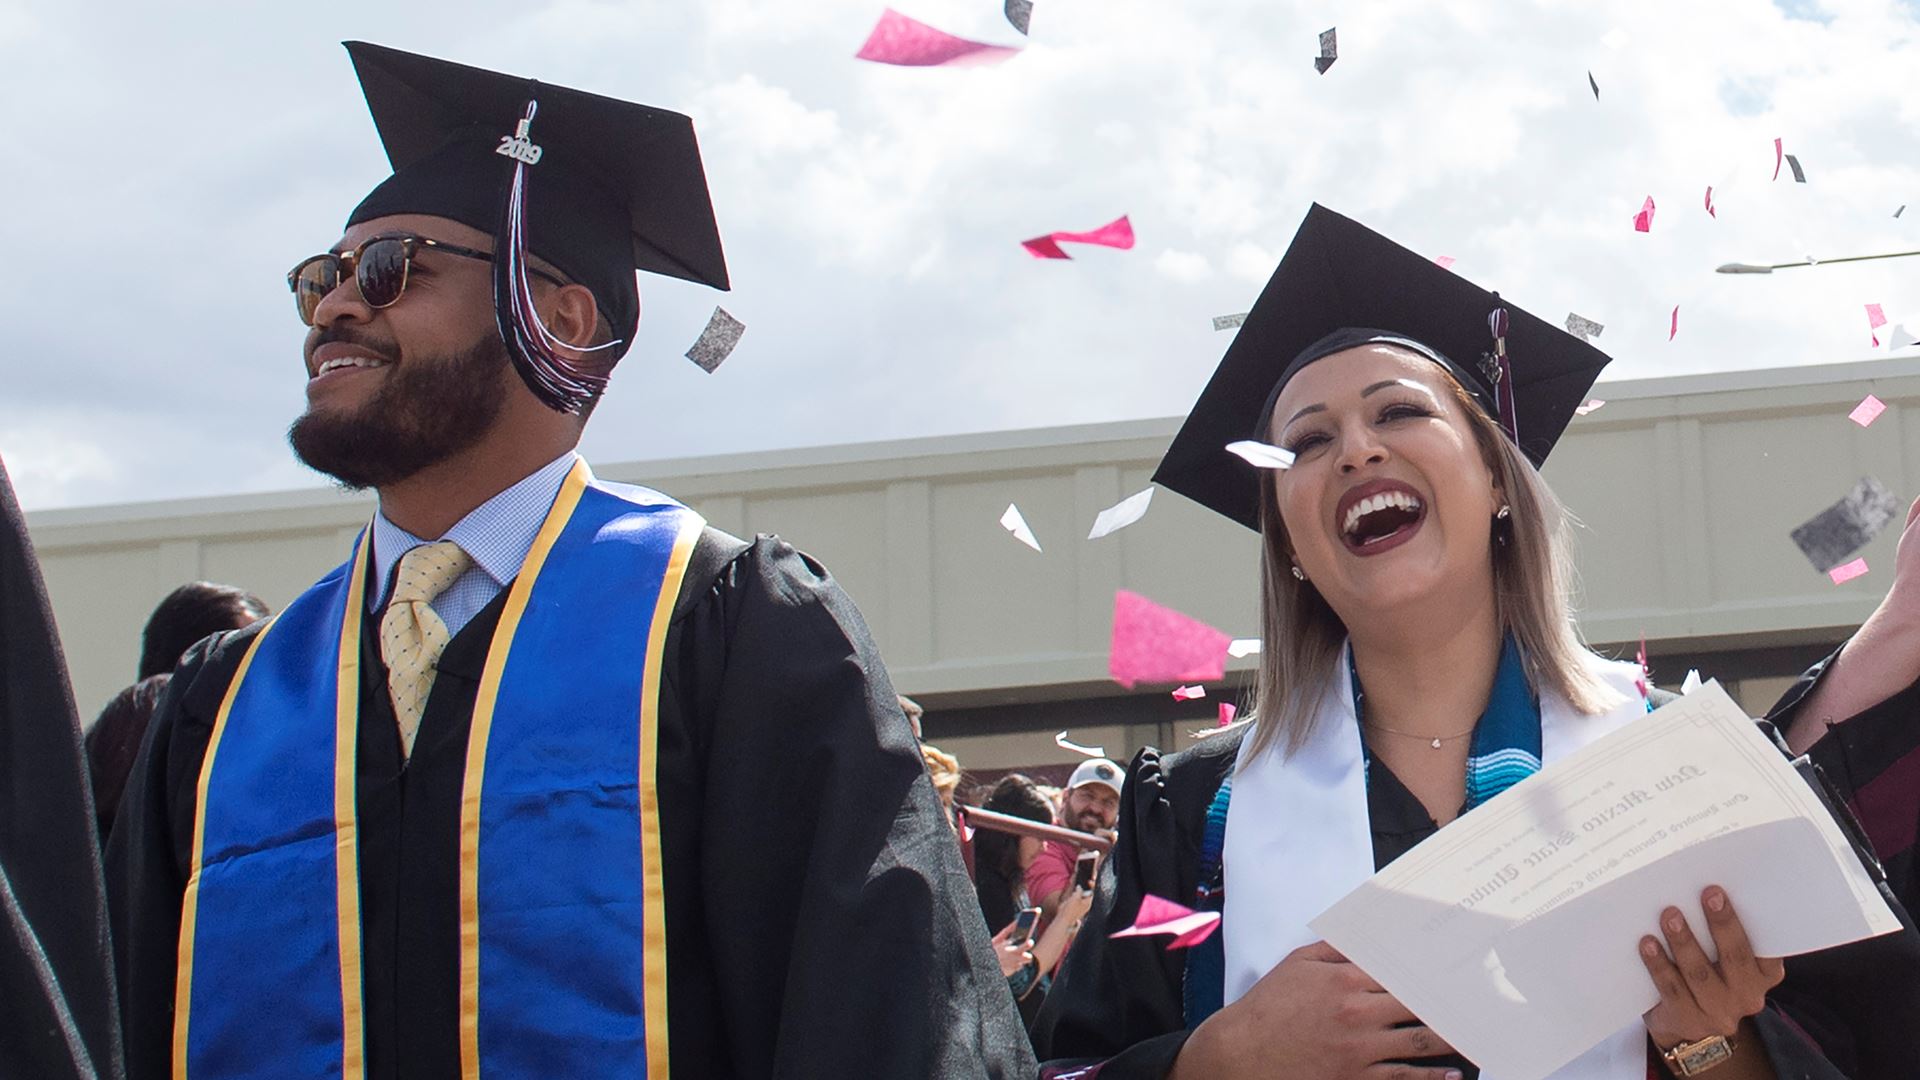 NMSU plans for limited in-person Spring 2021 commencement events